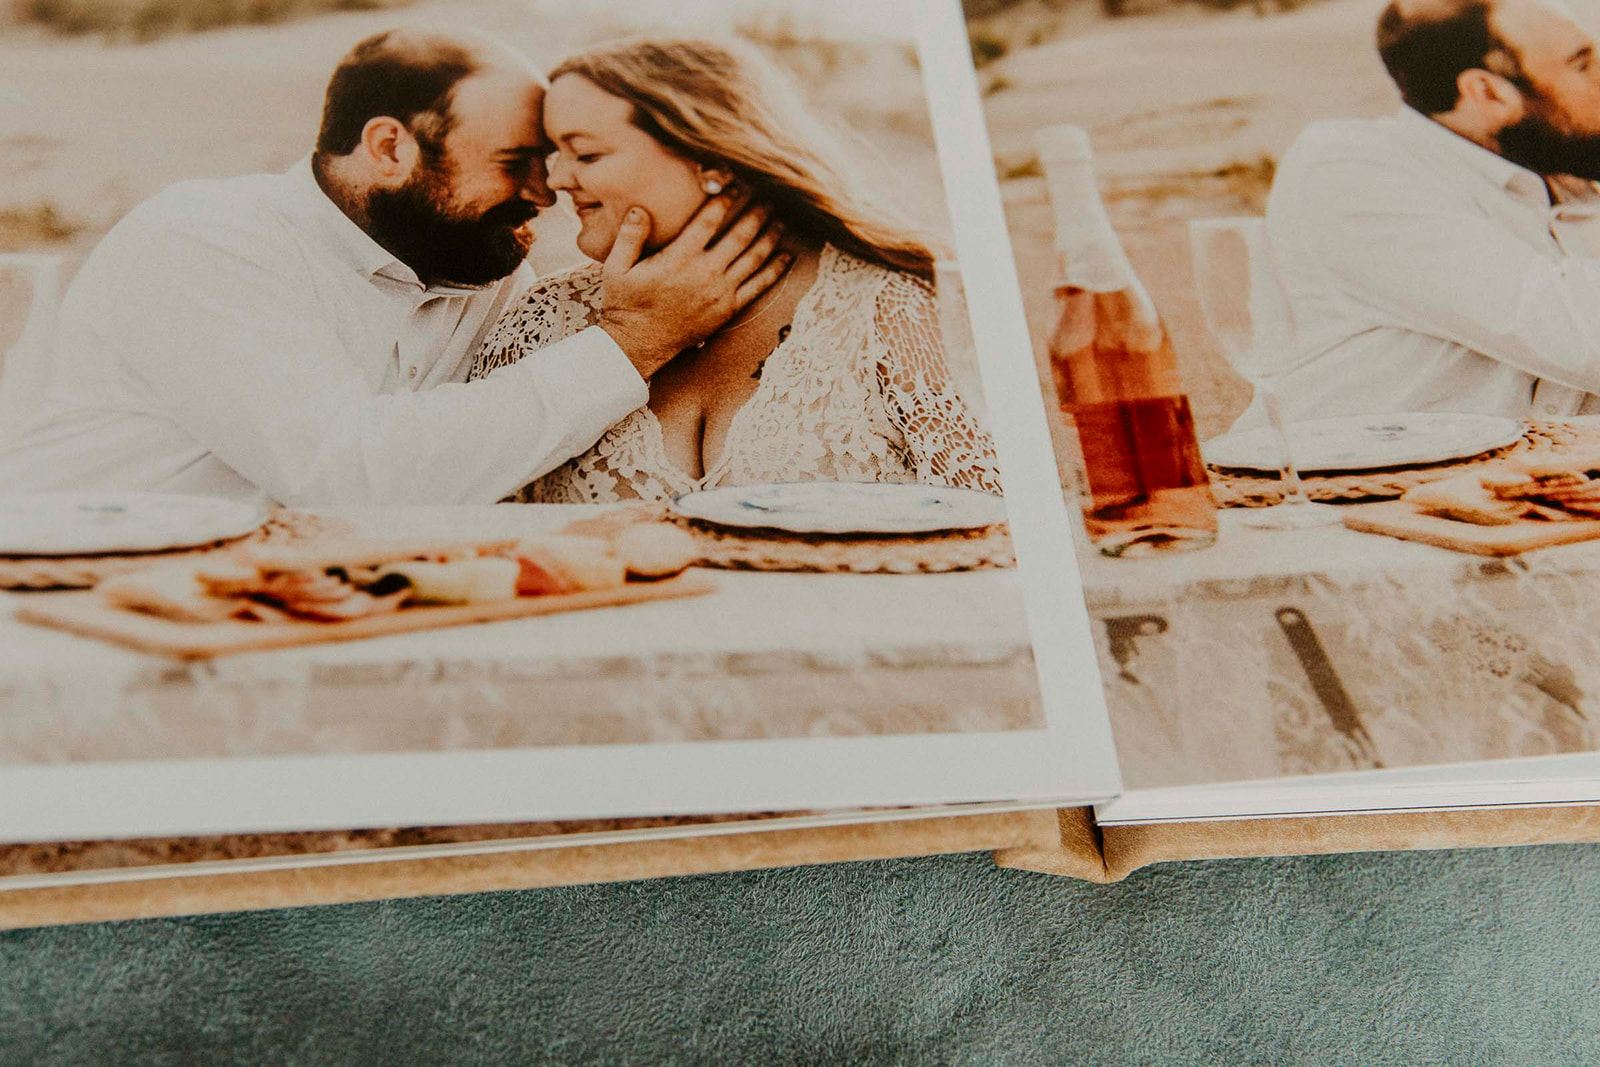 Photo album open to a page showing a couple embracing during a beach picnic, with a bottle of wine nearby.